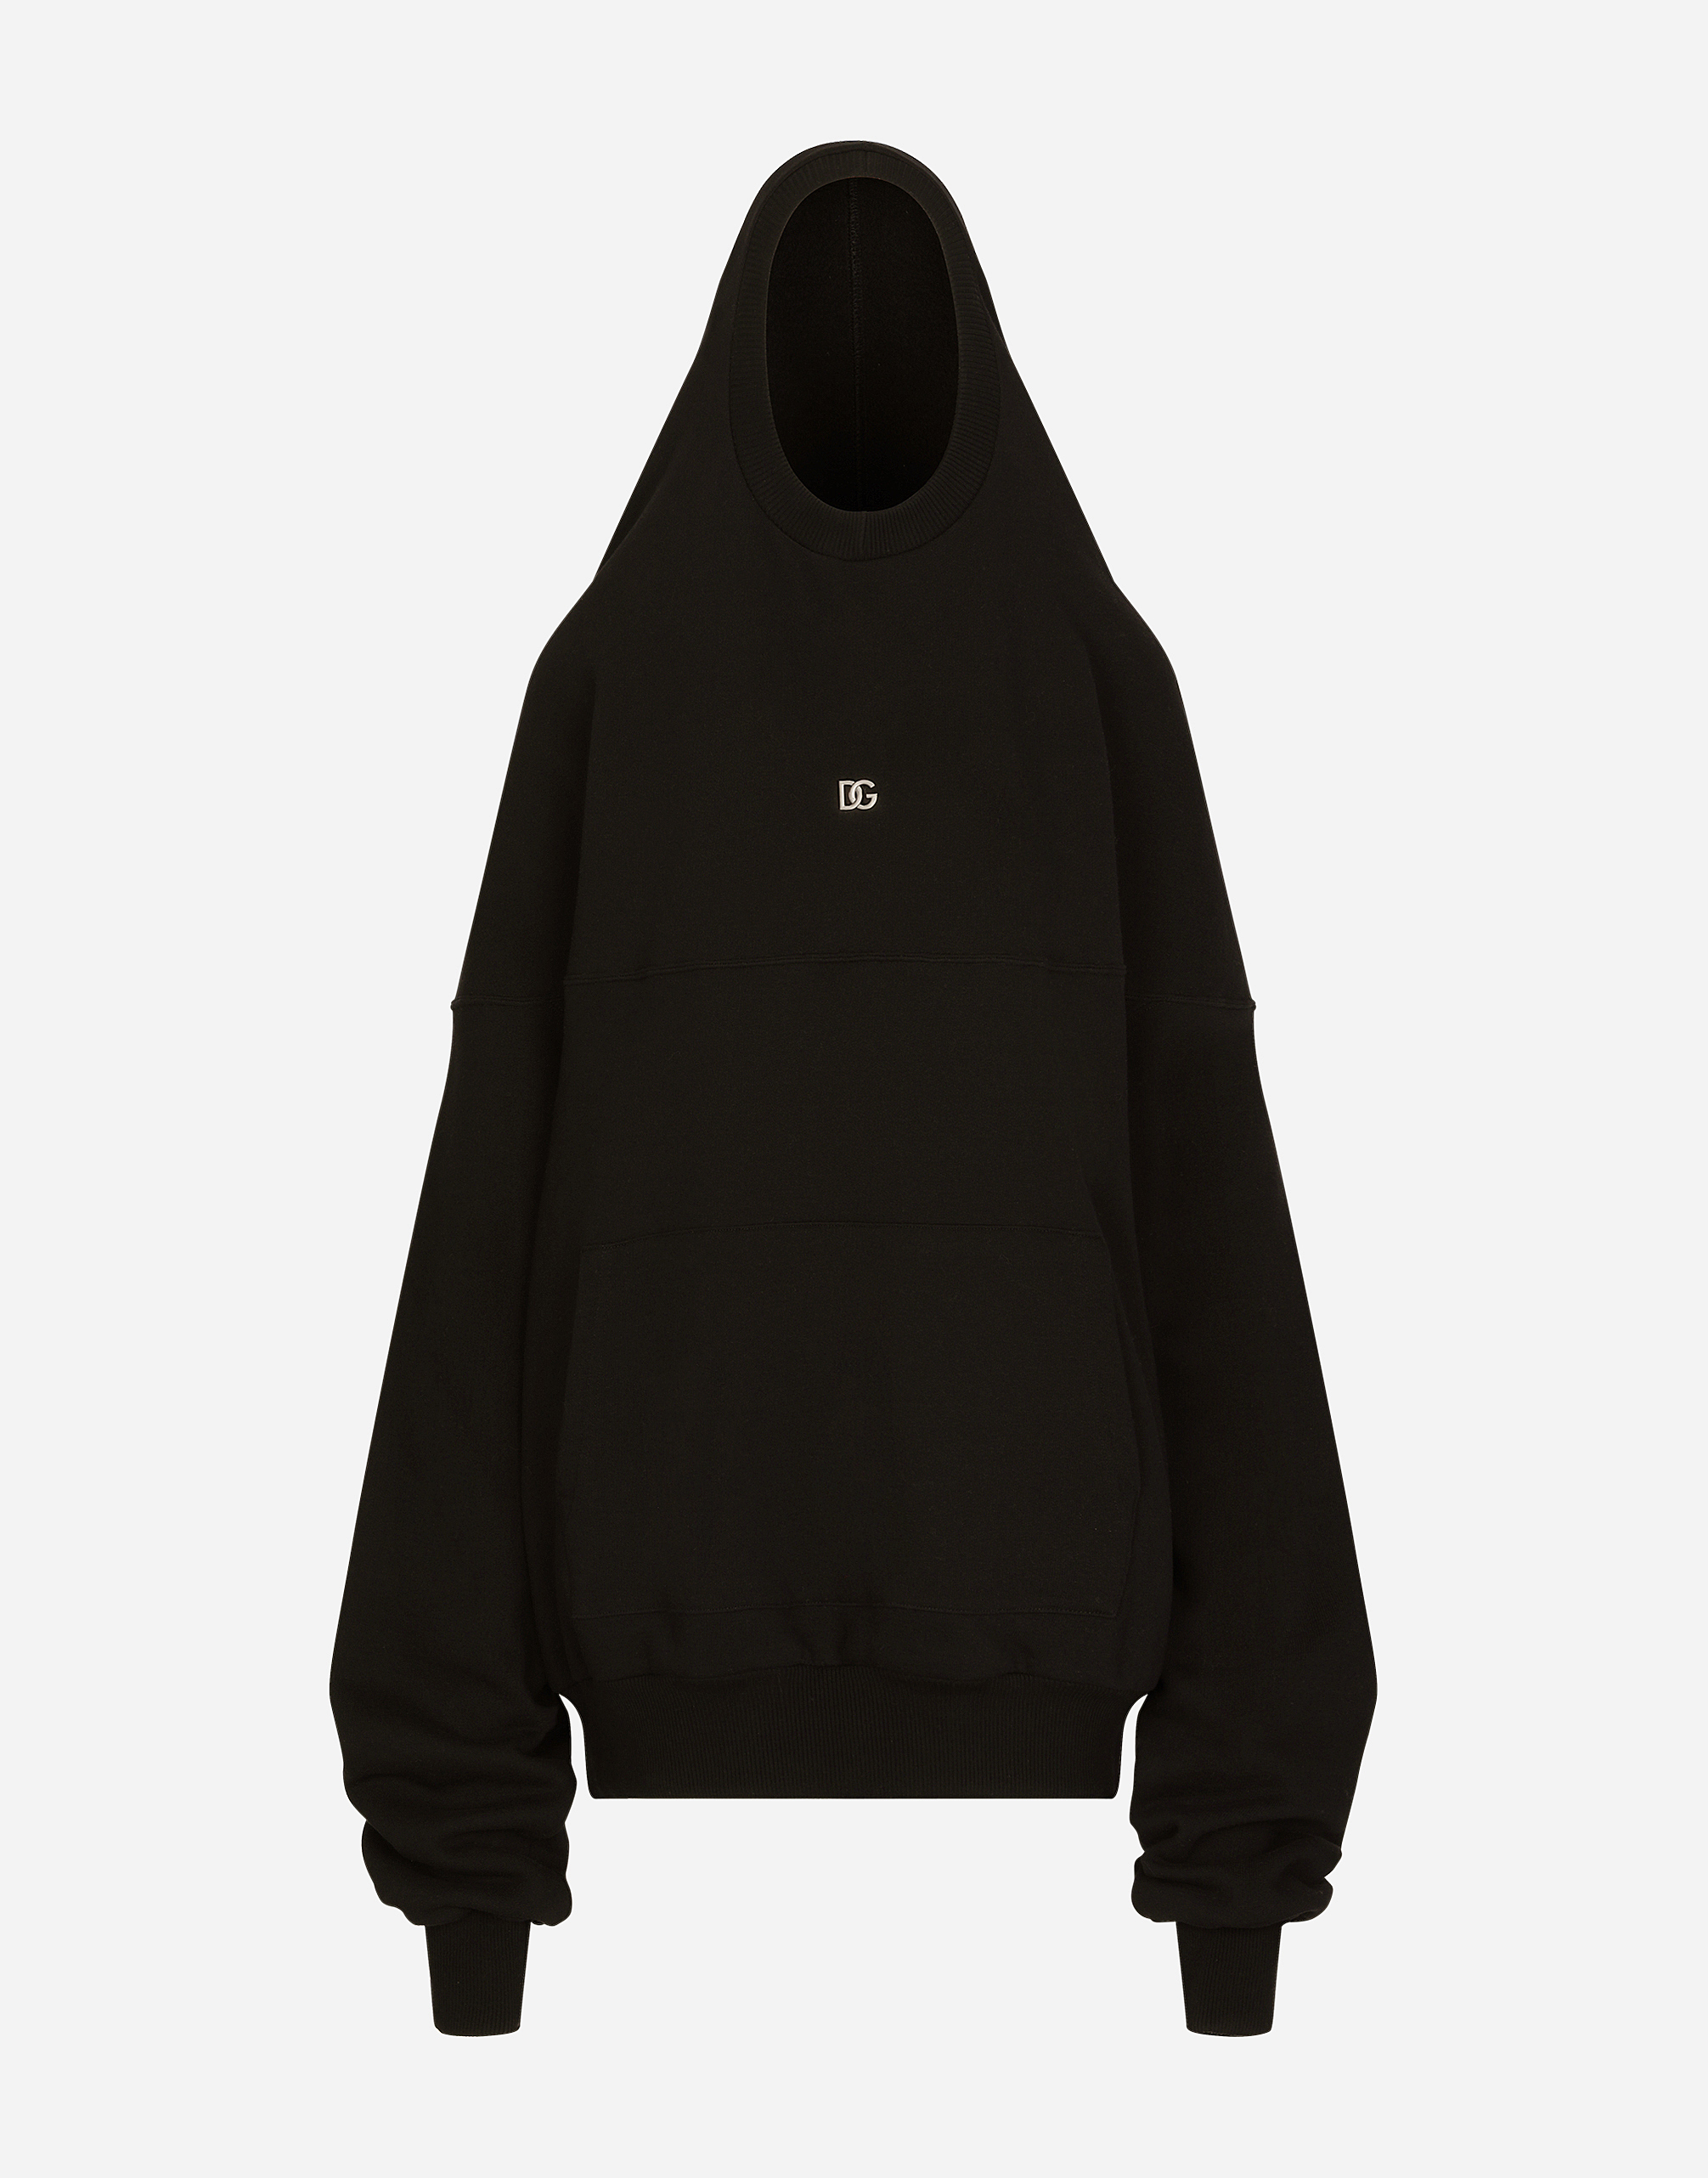 Hoodie with cut-out and DG logo in Black